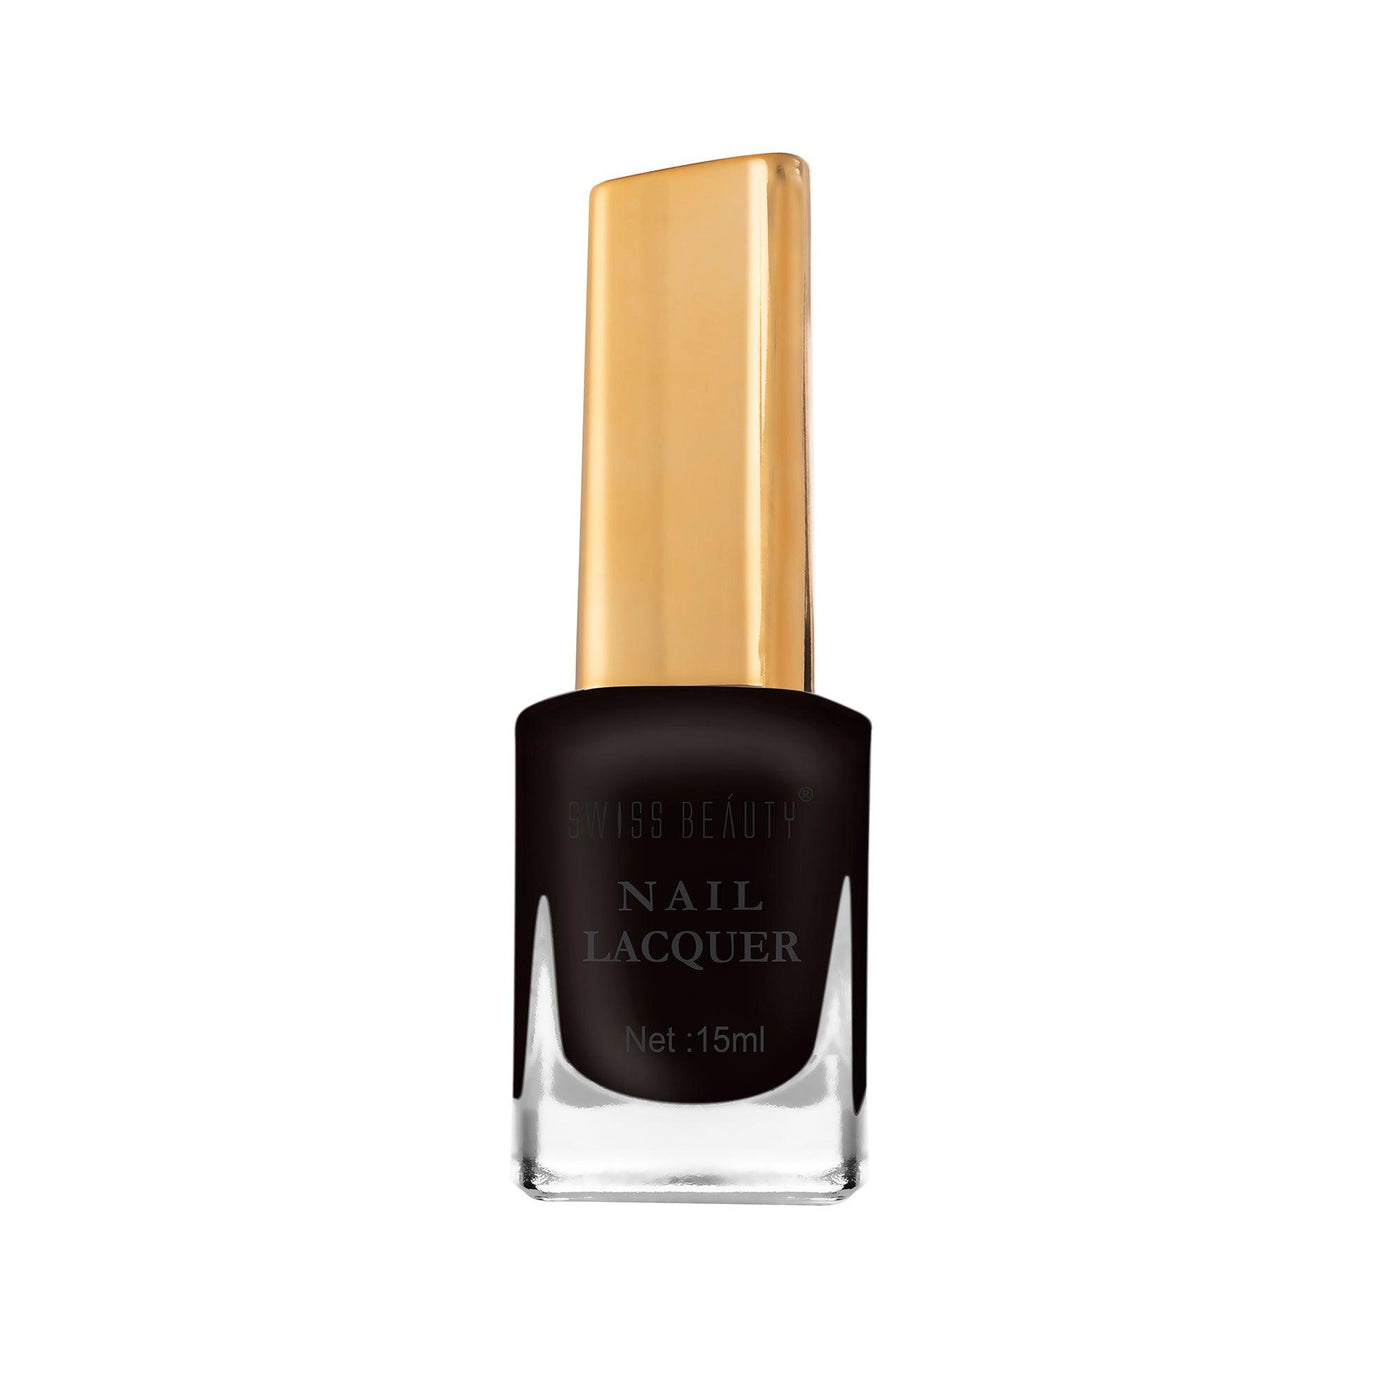 Buy Swiss Beauty Stunning Nail Lacquer - 105 (Fashion Prague) Online at Low  Prices in India - Amazon.in